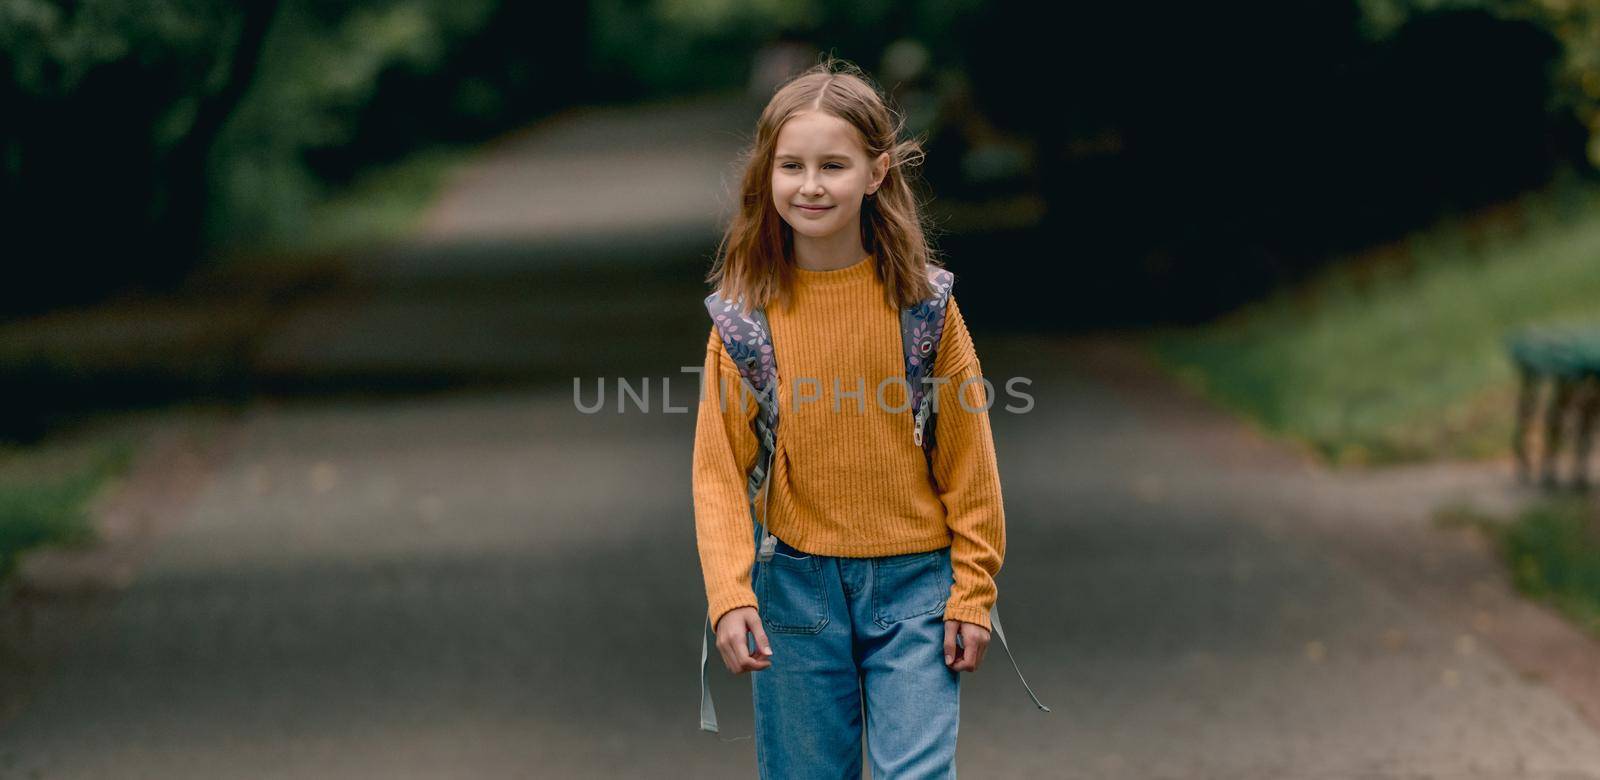 Happy school girl with backpack portrait outdoors. Portrait of schoolchild at autumn at the street